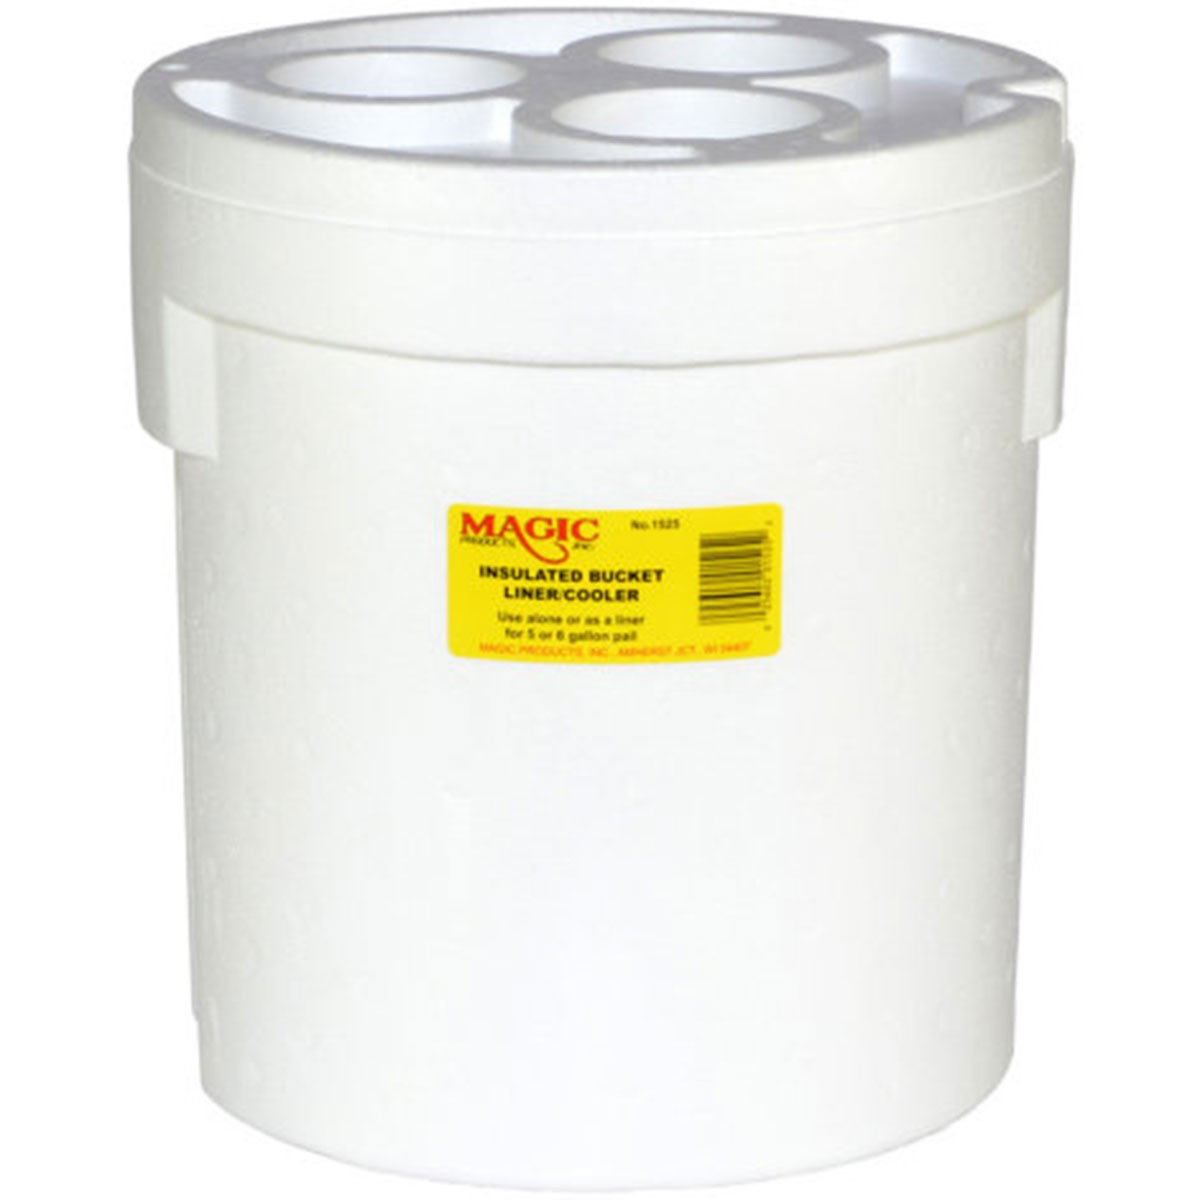 Poly Insulated Bucket Holder with 5-Gallon Bucket